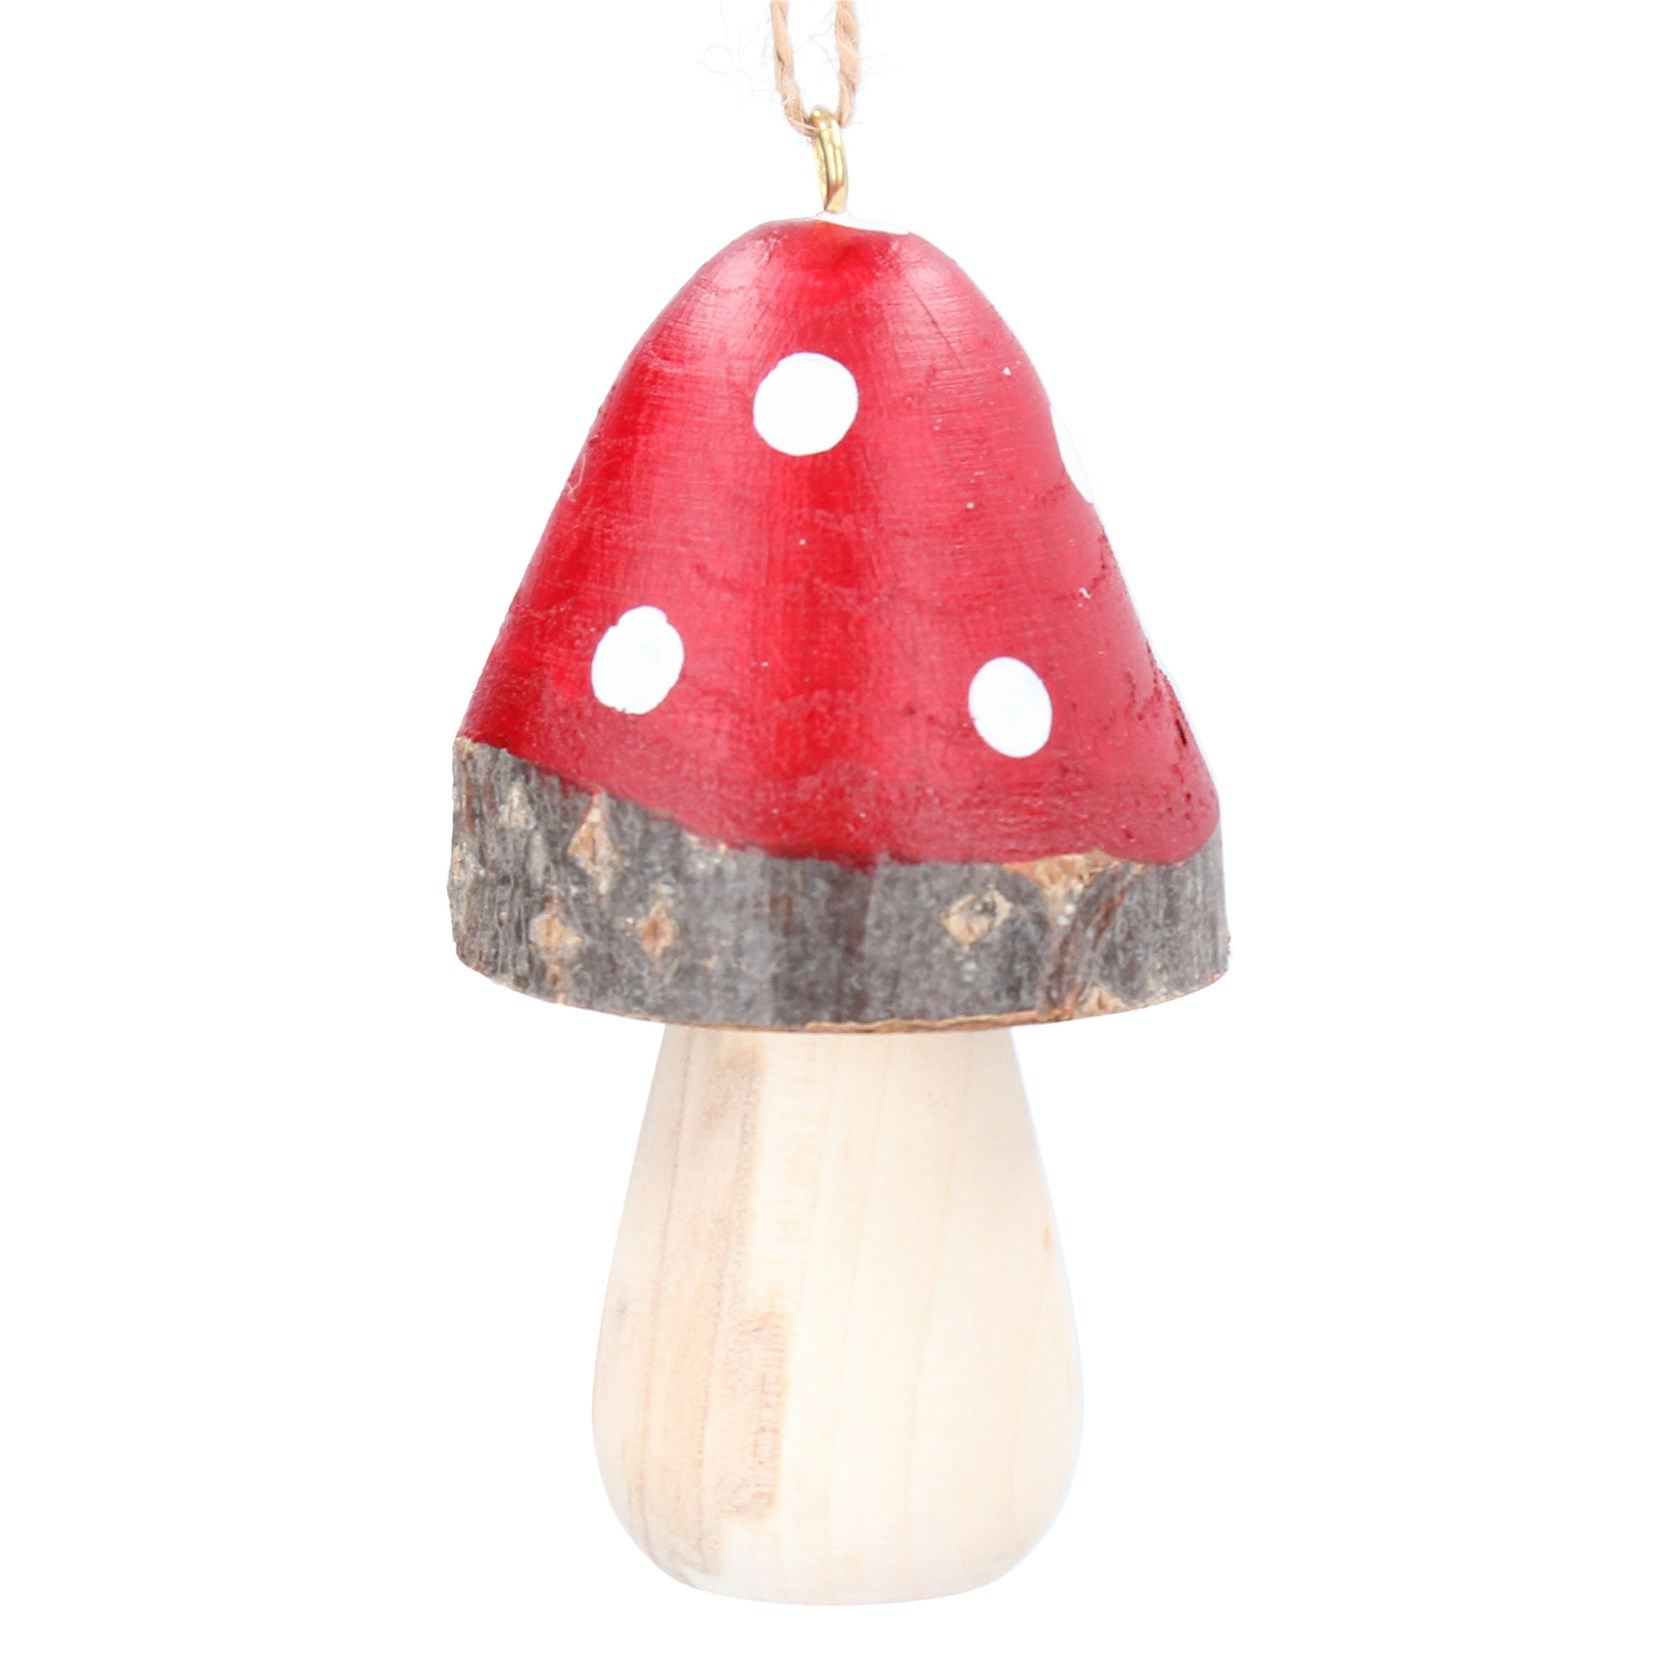 Wooden painted toadstool hanging decoration. By Gisela Graham.